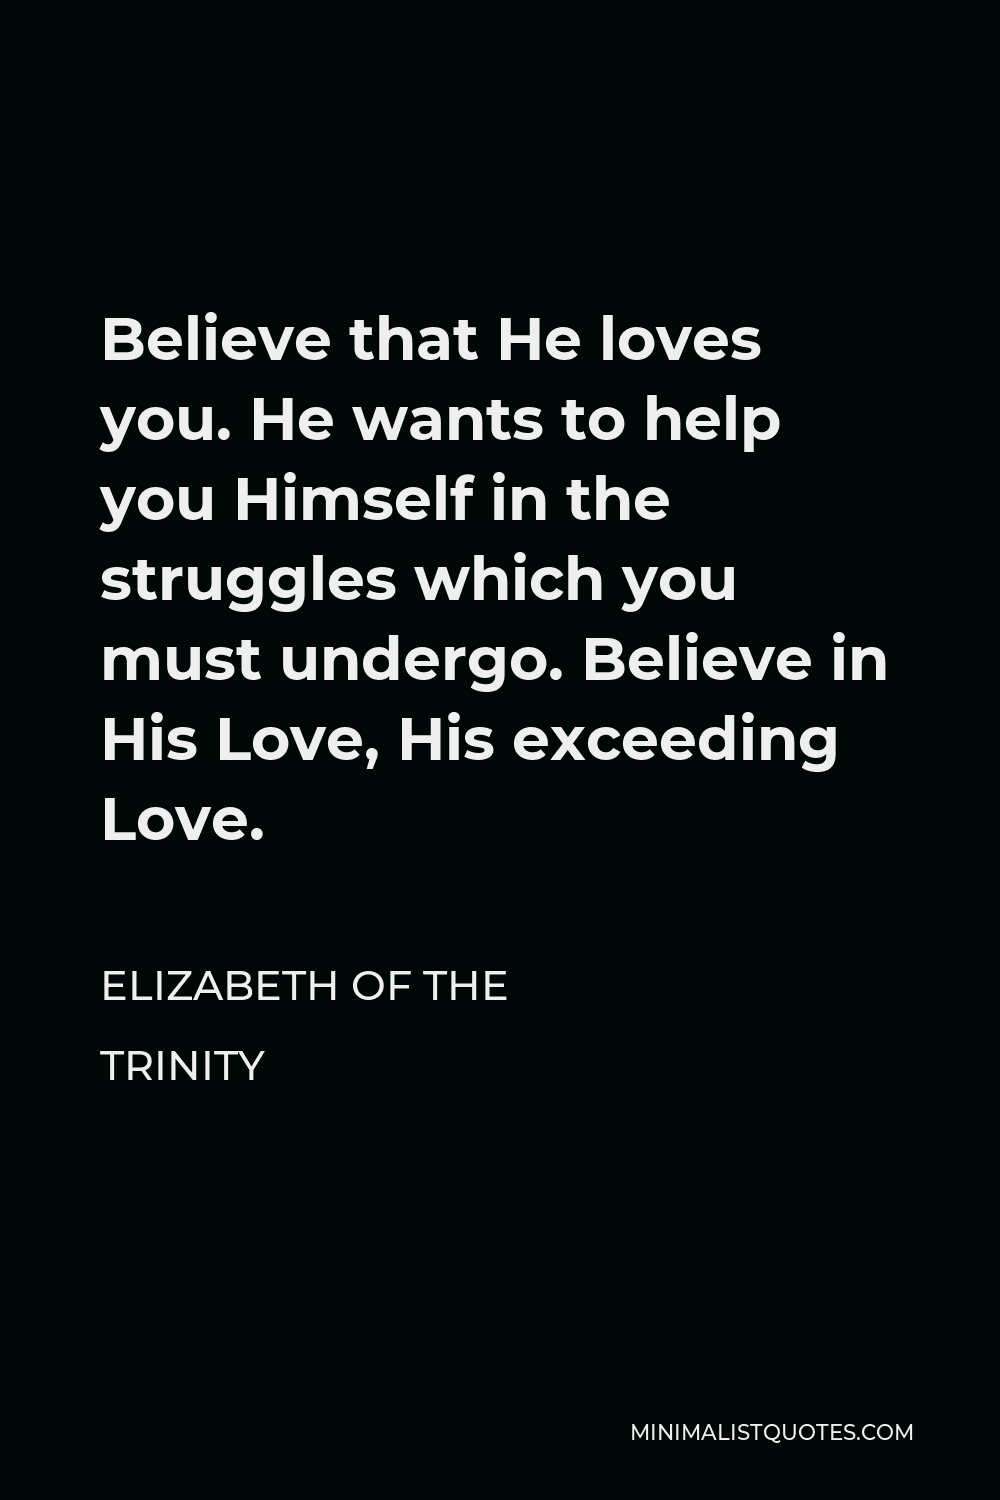 Elizabeth of the Trinity Quote - Believe that He loves you. He wants to help you Himself in the struggles which you must undergo. Believe in His Love, His exceeding Love.